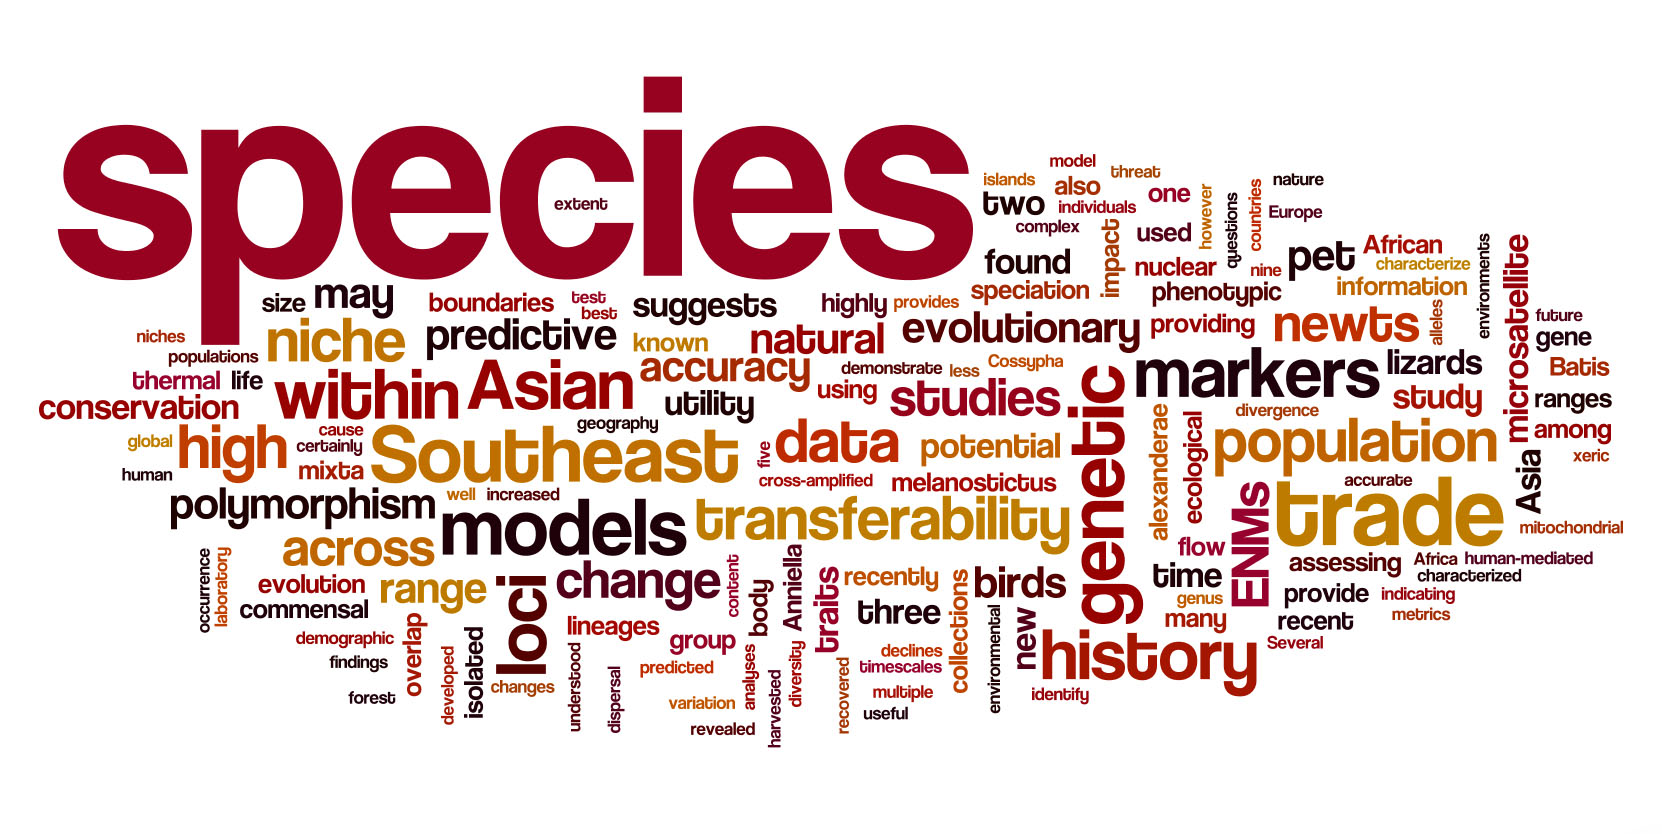 A wordle word cloud based on abstracts from 2015-16